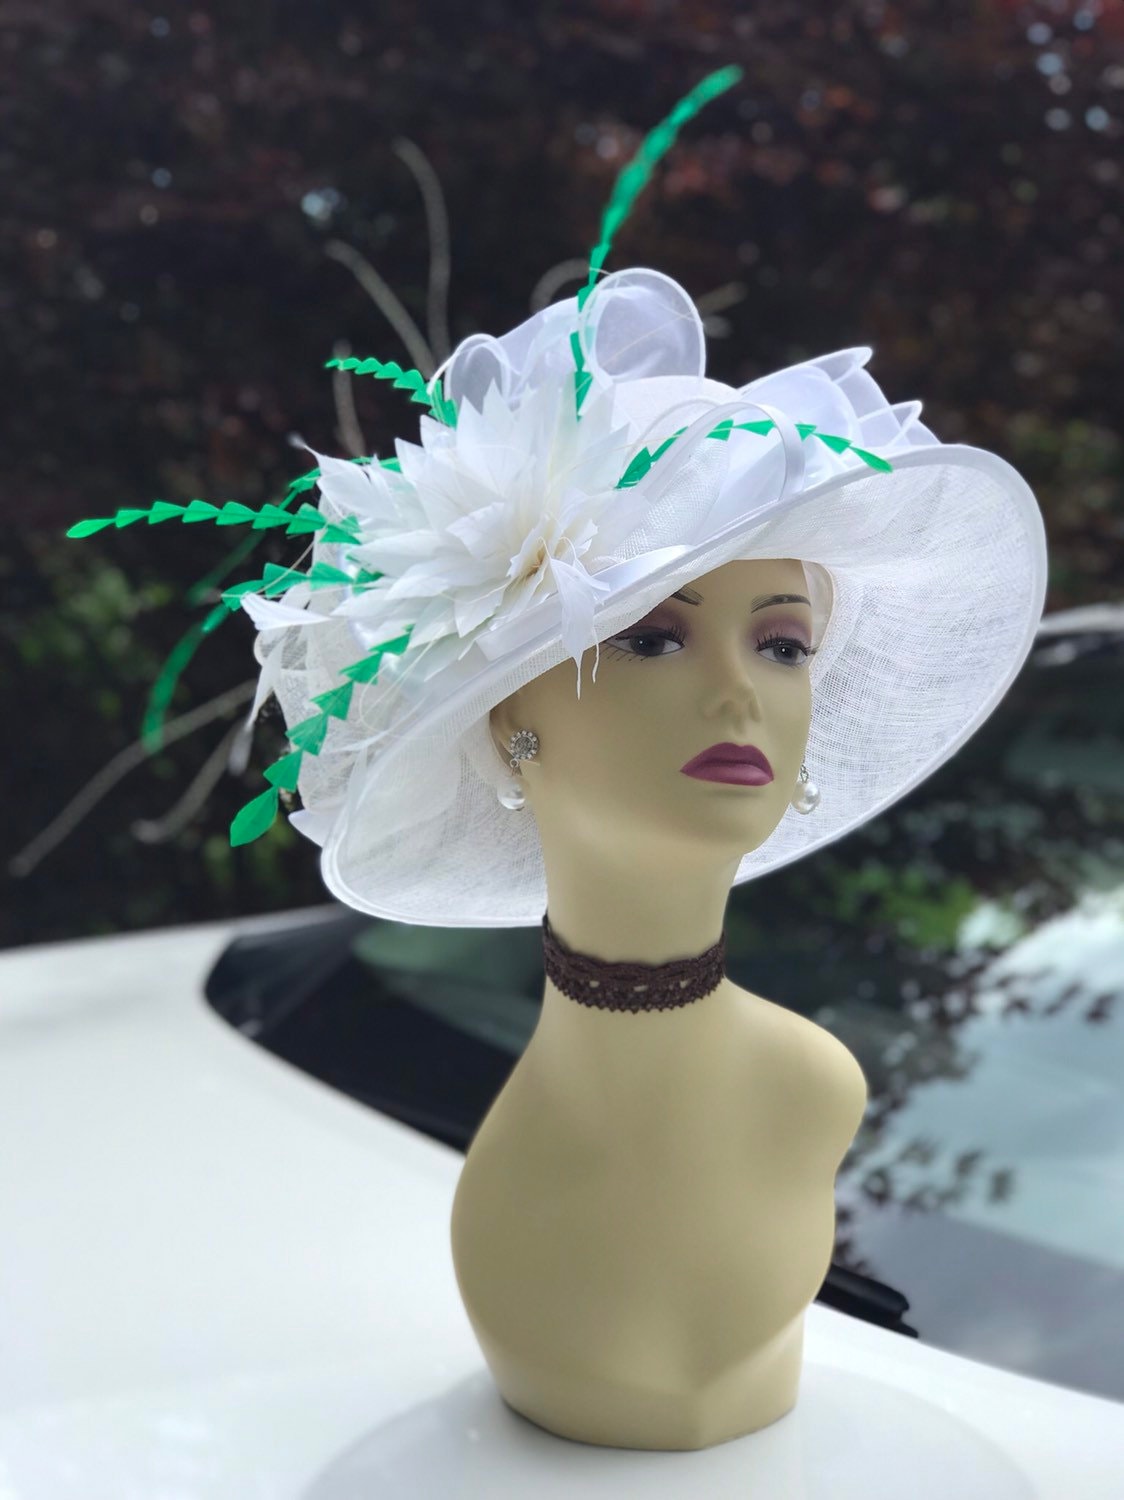 Kentucky Derby Easter Tea Party WhiteWhite, Royal Blue, Pink SF044 Church Formal Hat Feather Satin Medium Woman's Sinamay Hat Wedding